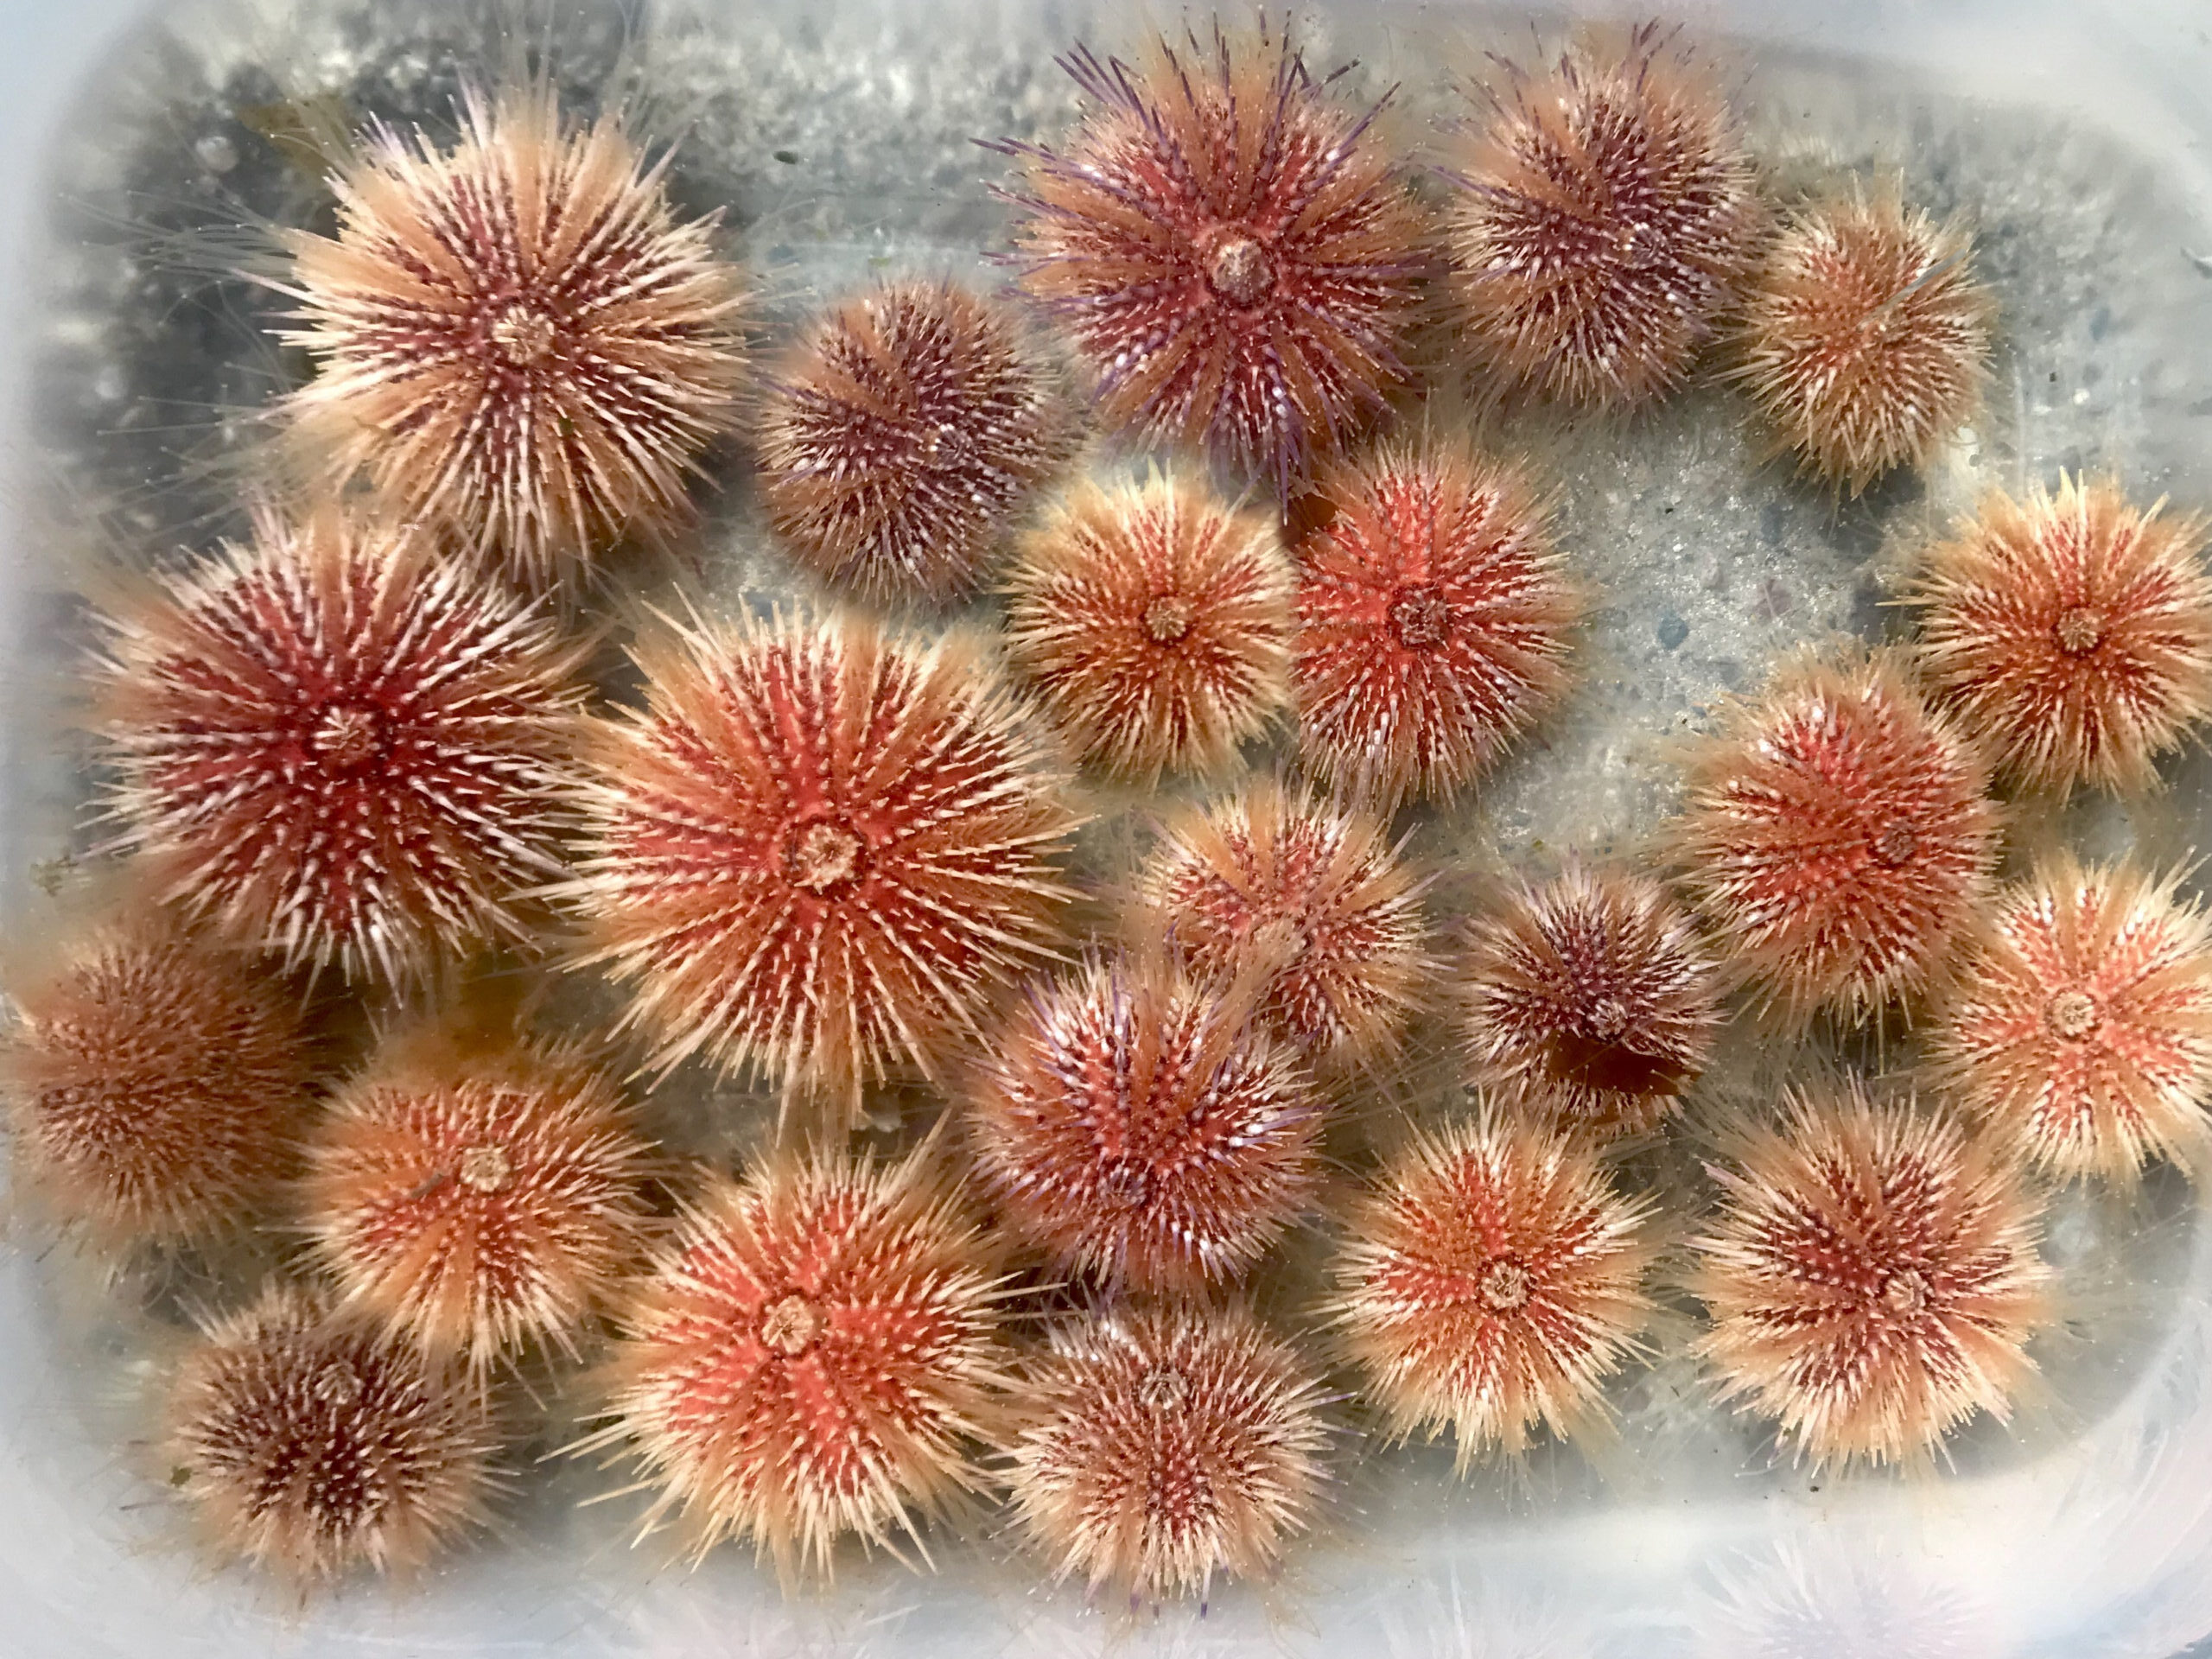 A group of sea urchins